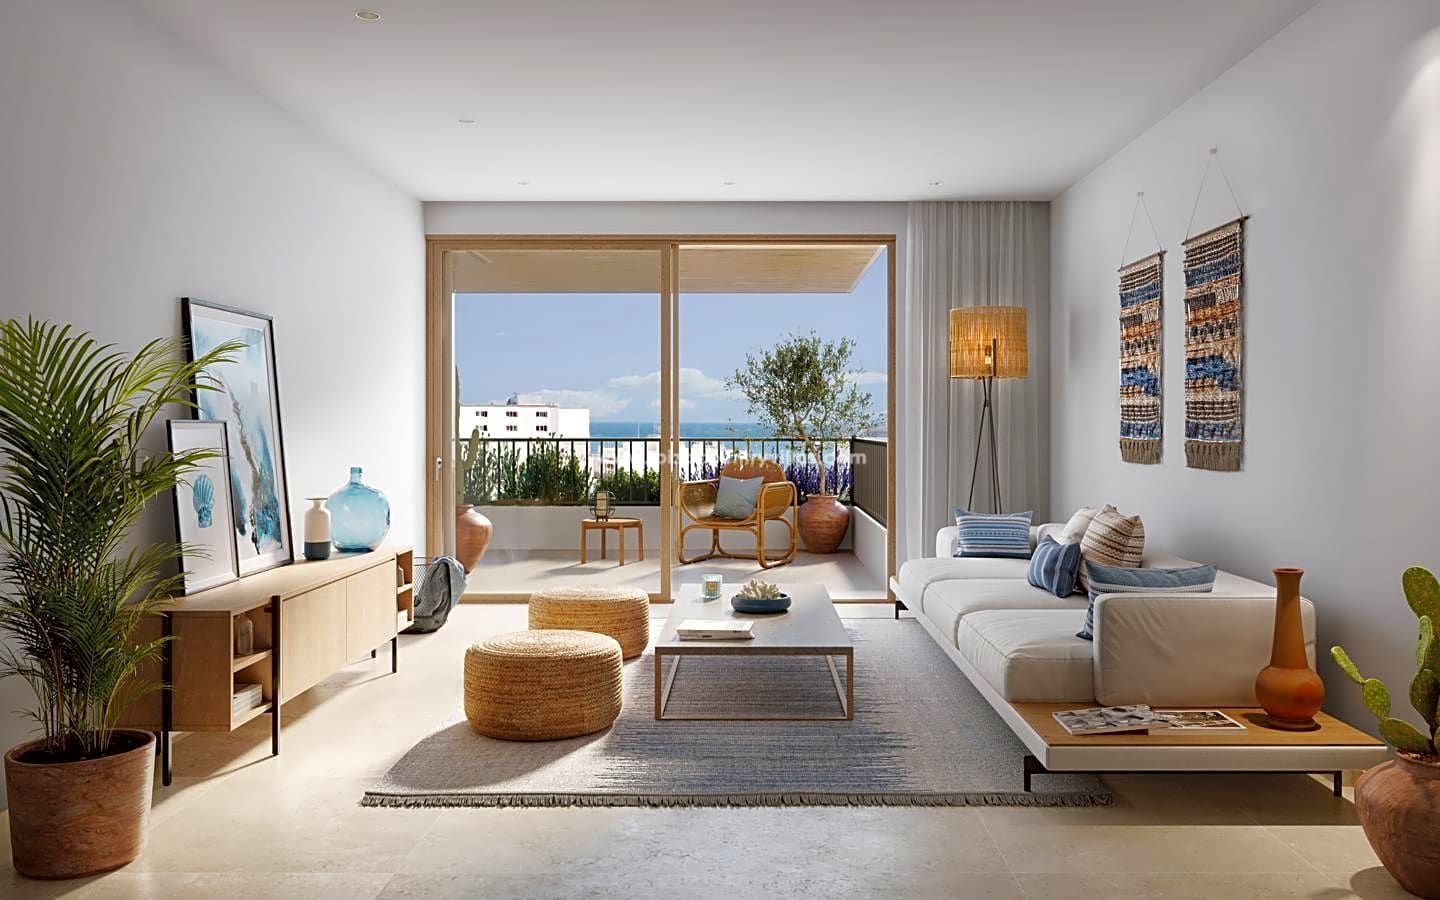 Luxurious new 2-bedroom apartments in the centre of Santa Eulalia